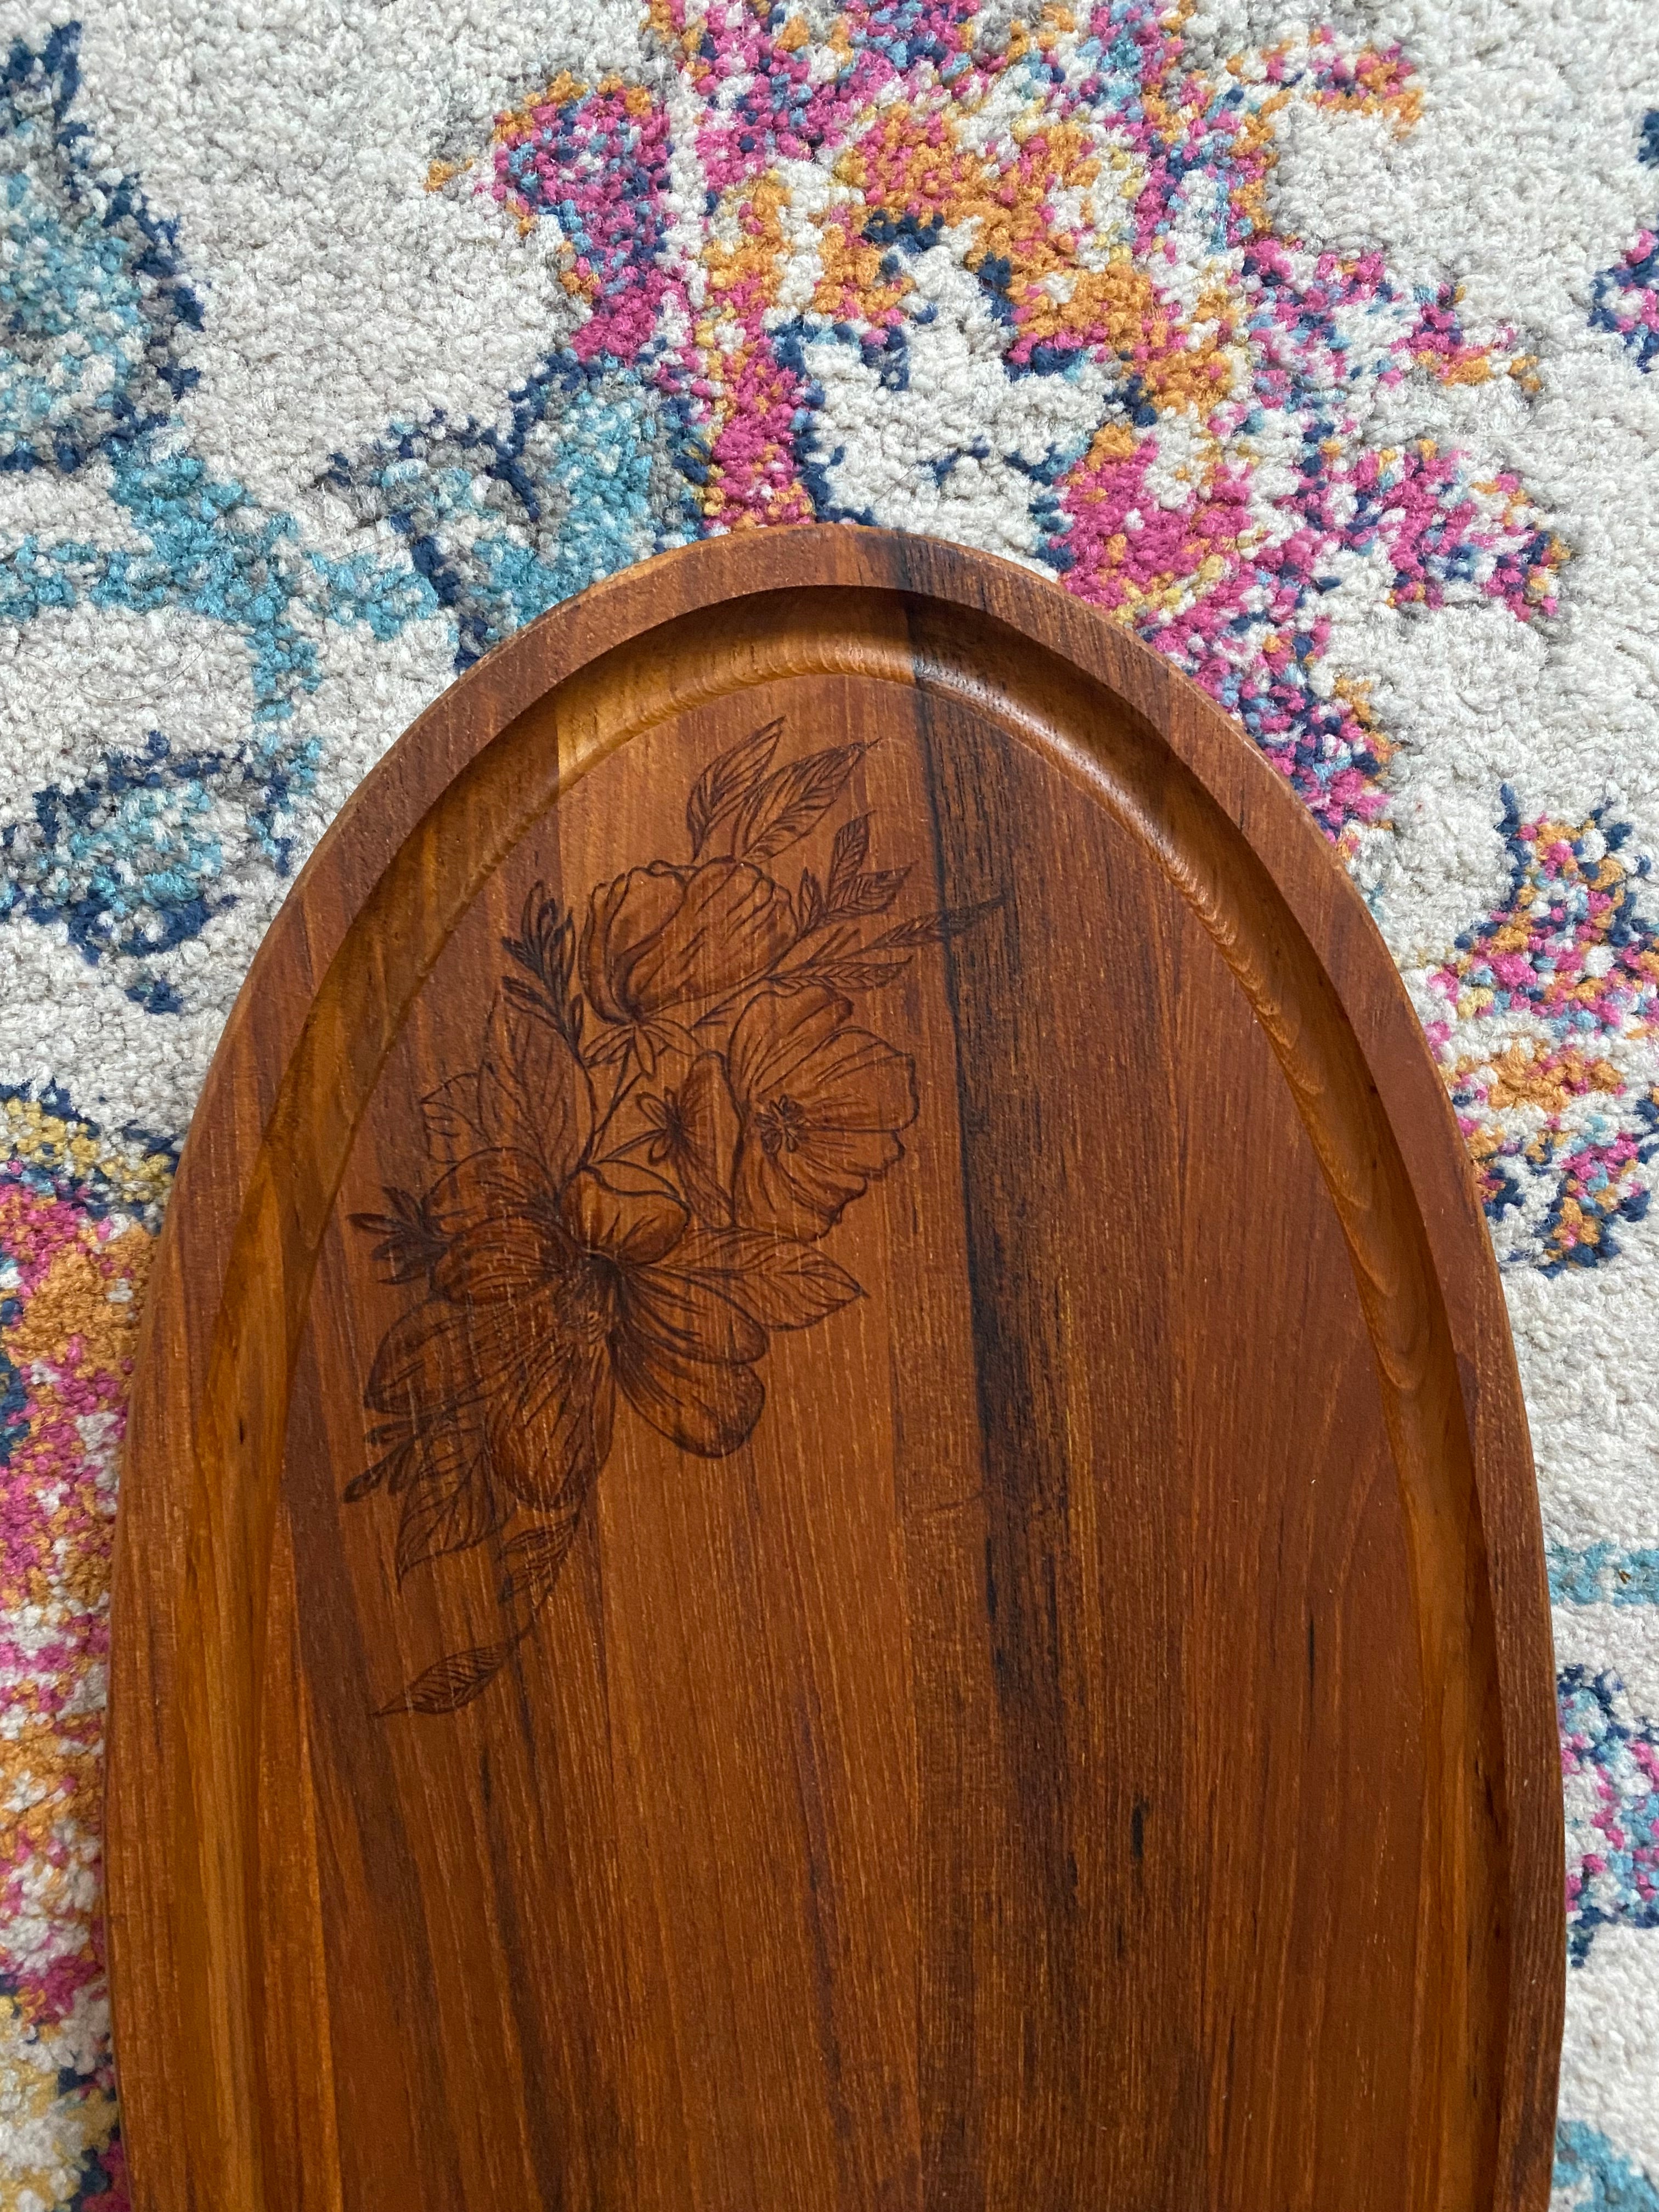 Floral Woodburned Charcuterie Board